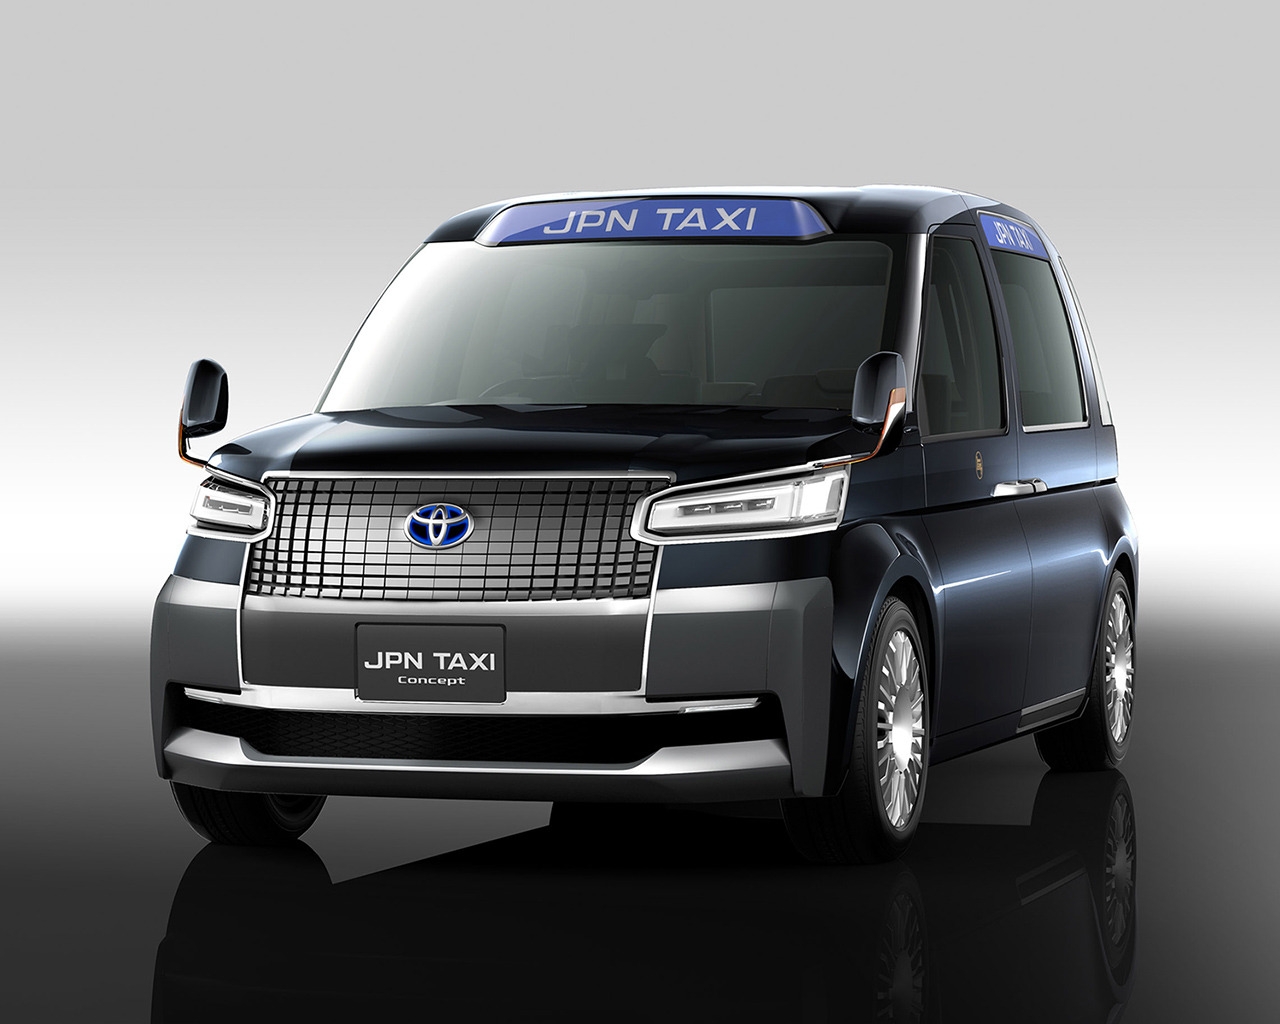 Toyota Japan Taxi Concept Car for 1280 x 1024 resolution